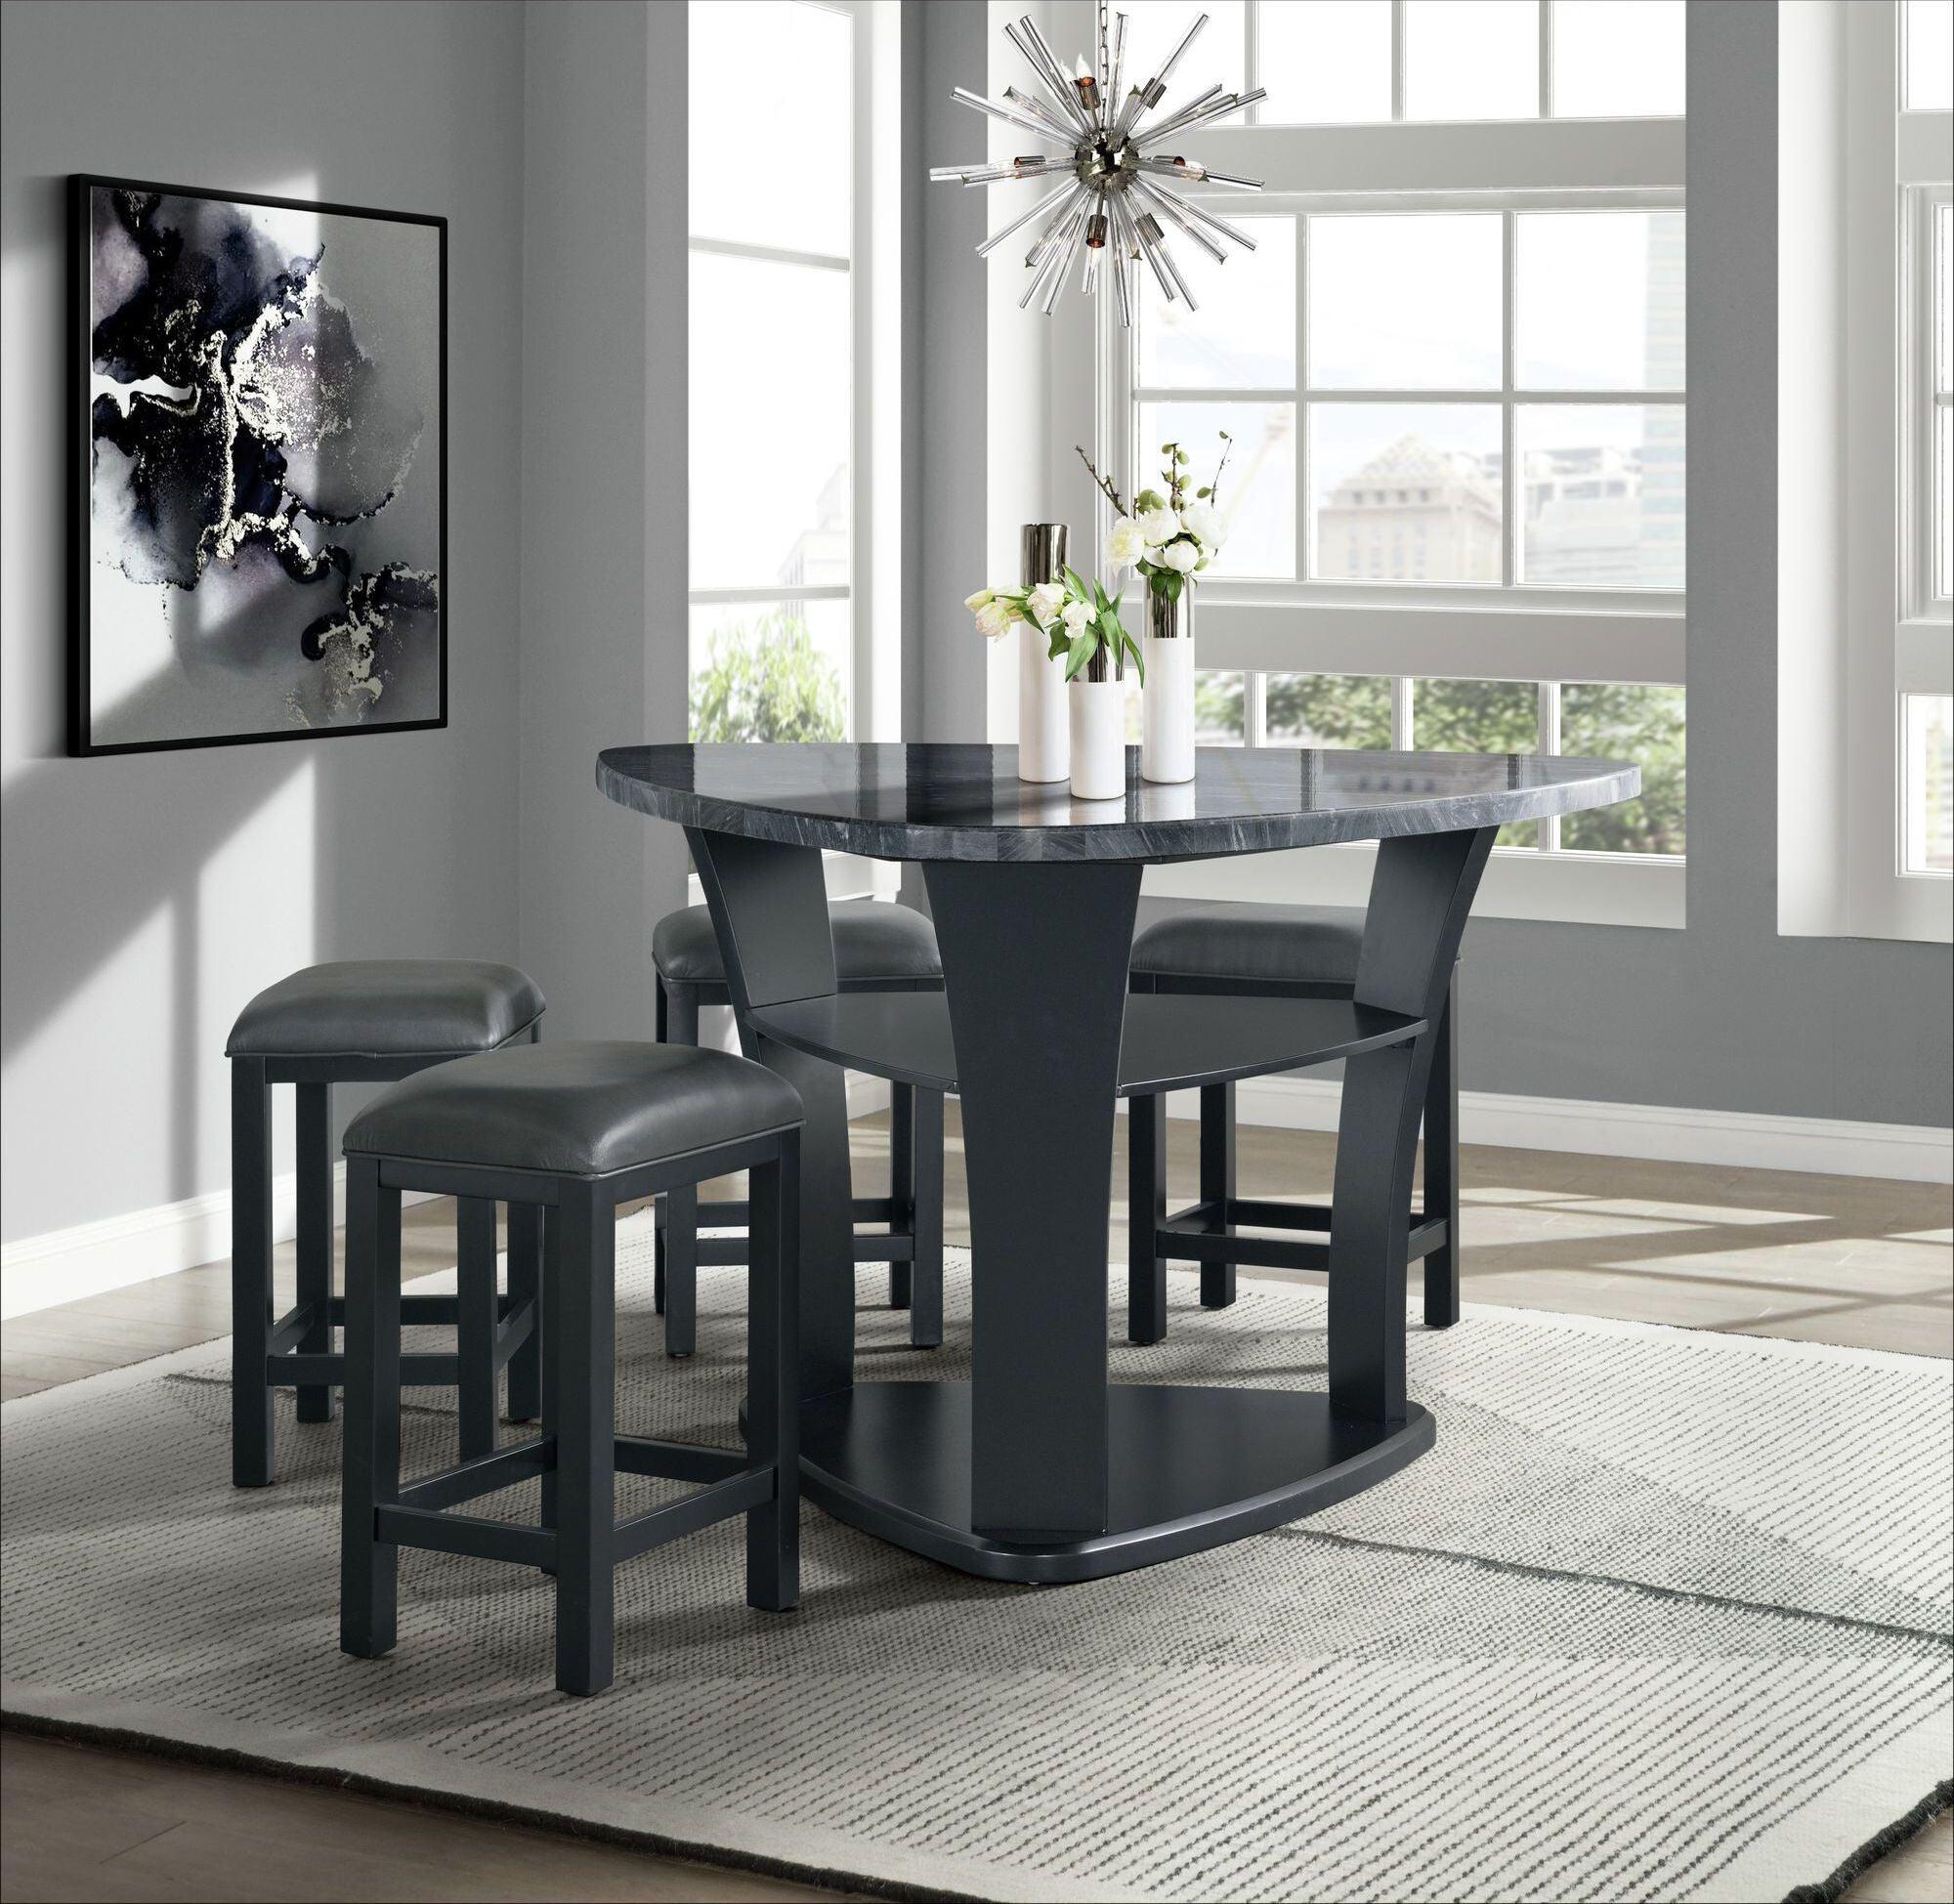 Elements Barstools - Colton Counter Stoolsl in Grey (Set of 2)